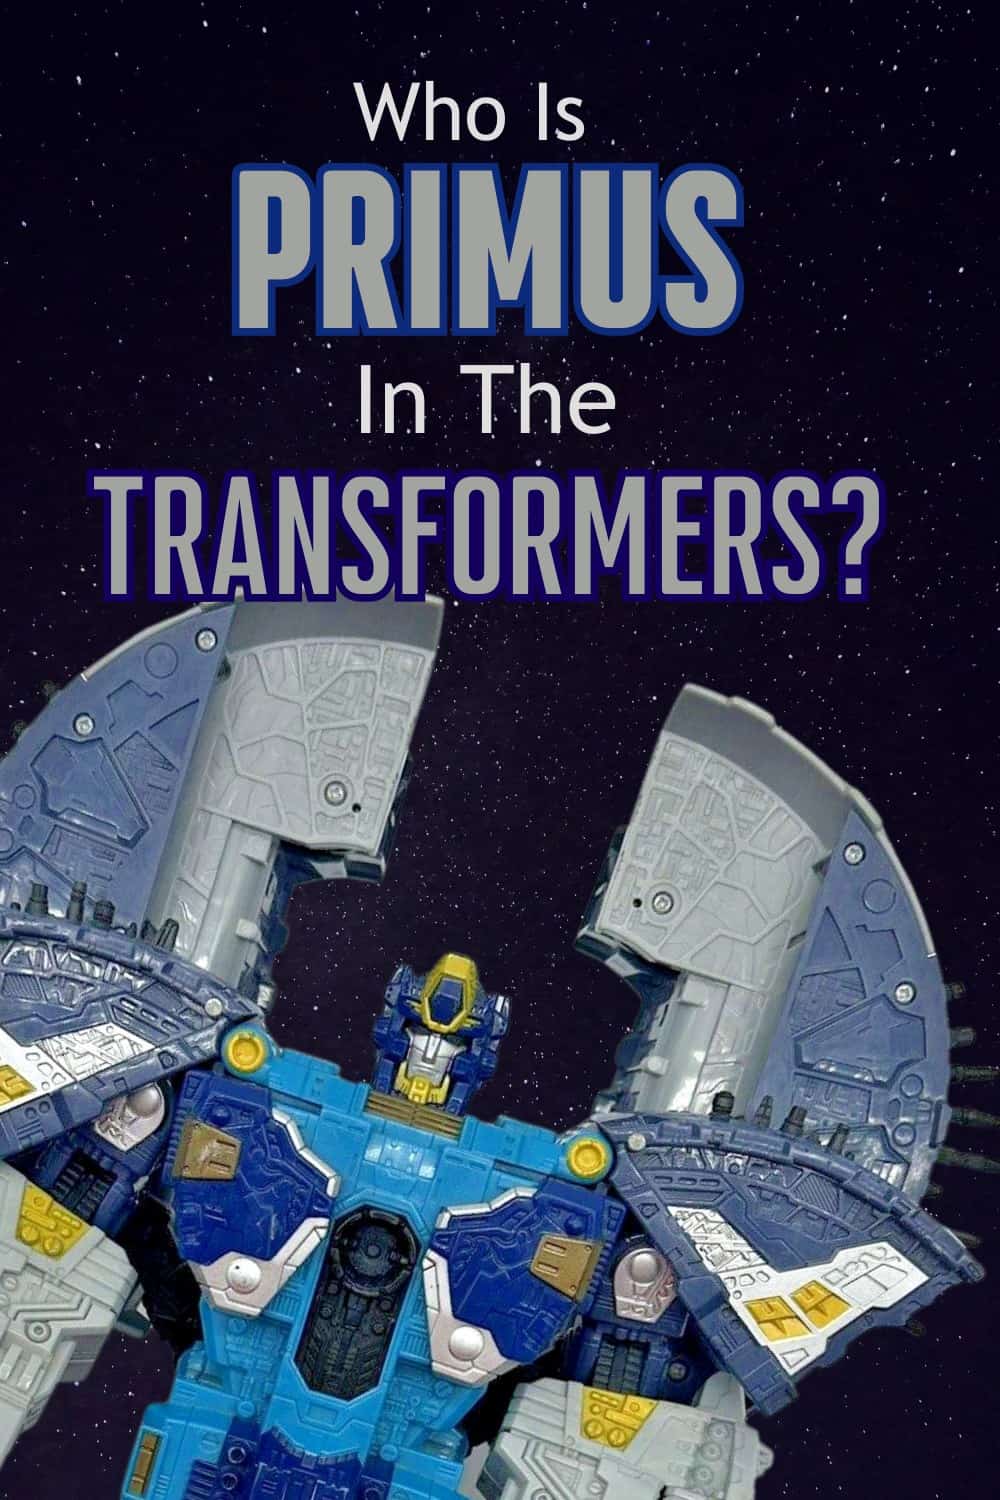 Primus is a God who created the Transformer